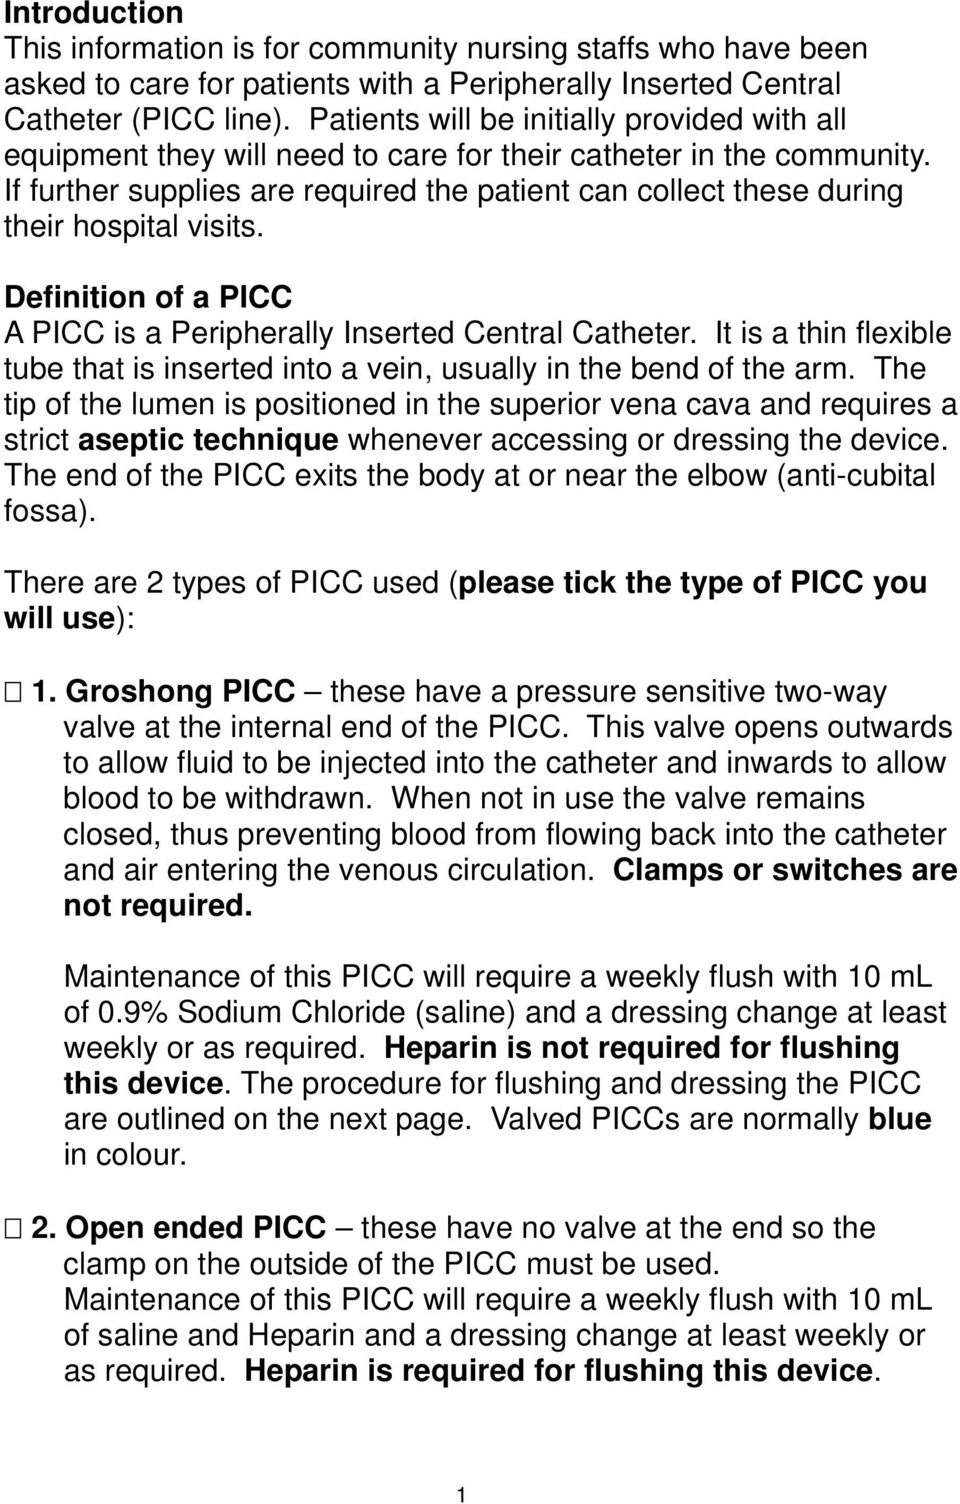 If further supplies are required the patient can collect these during their hospital visits. Definition of a PICC A PICC is a Peripherally Inserted Central Catheter.